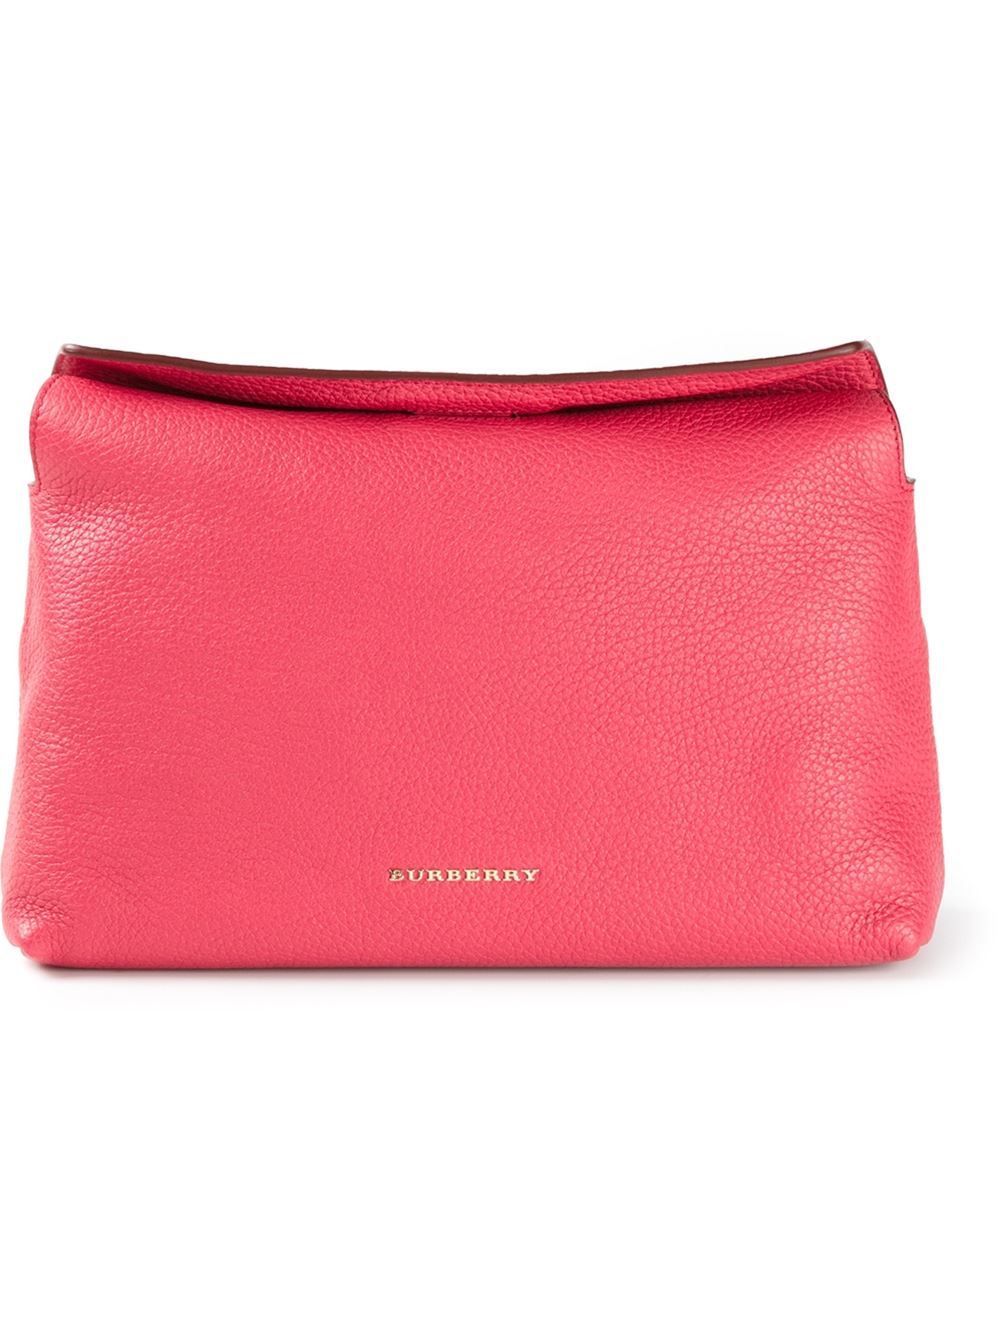 Burberry Foldover Front Cross Body Bag in Pink - Lyst